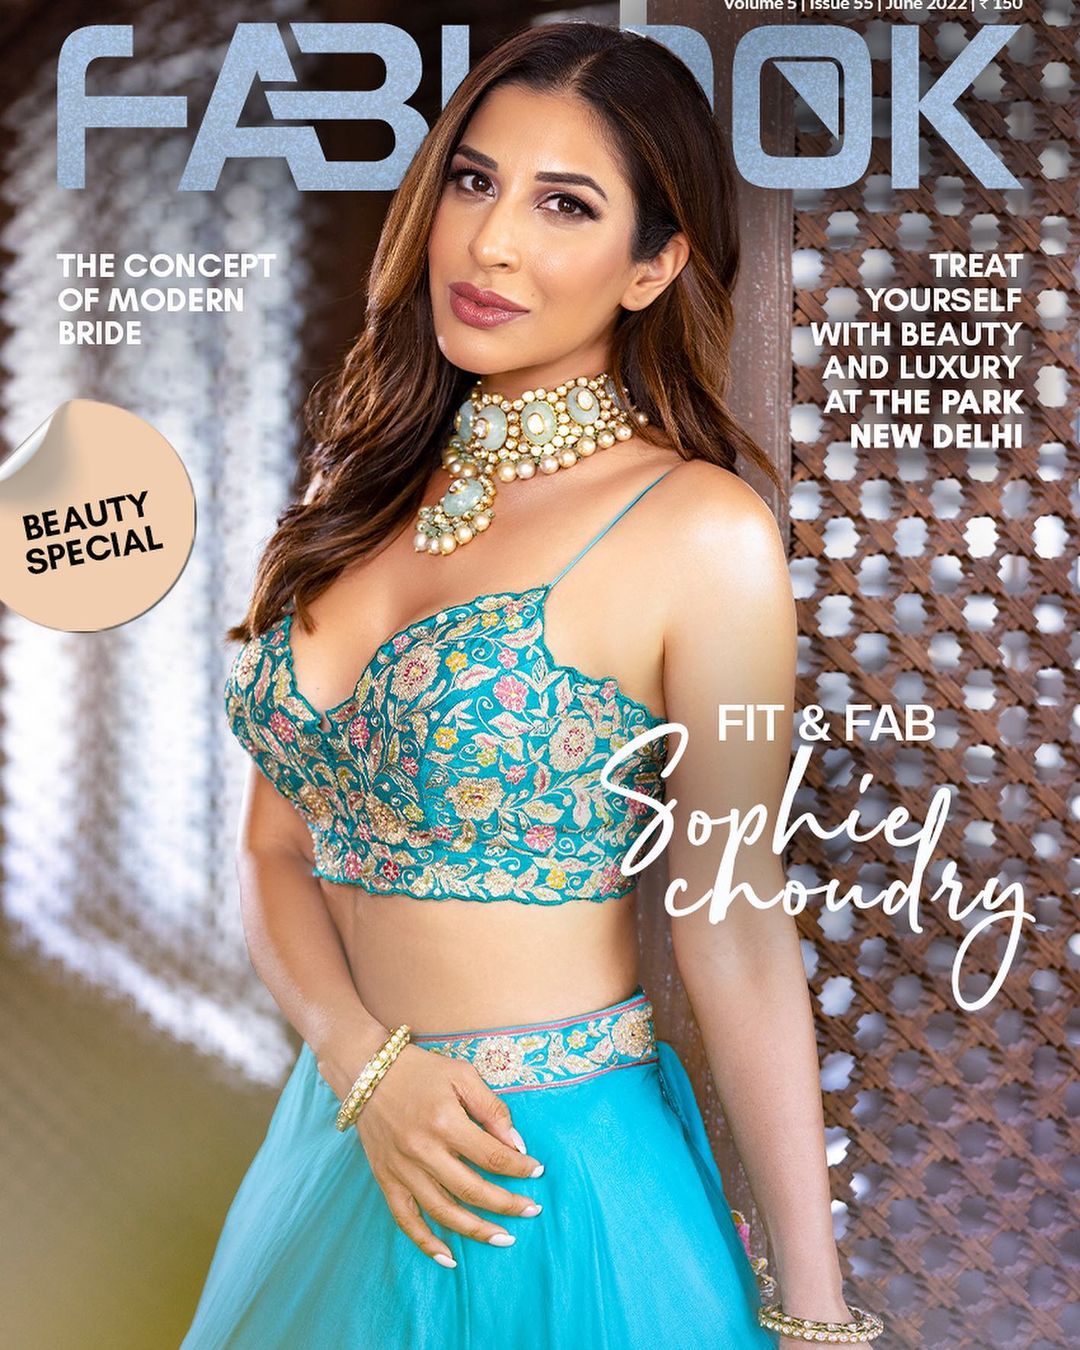 Sophie Choudry donned these beautiful lehengas as cover star of Fab Look magazine